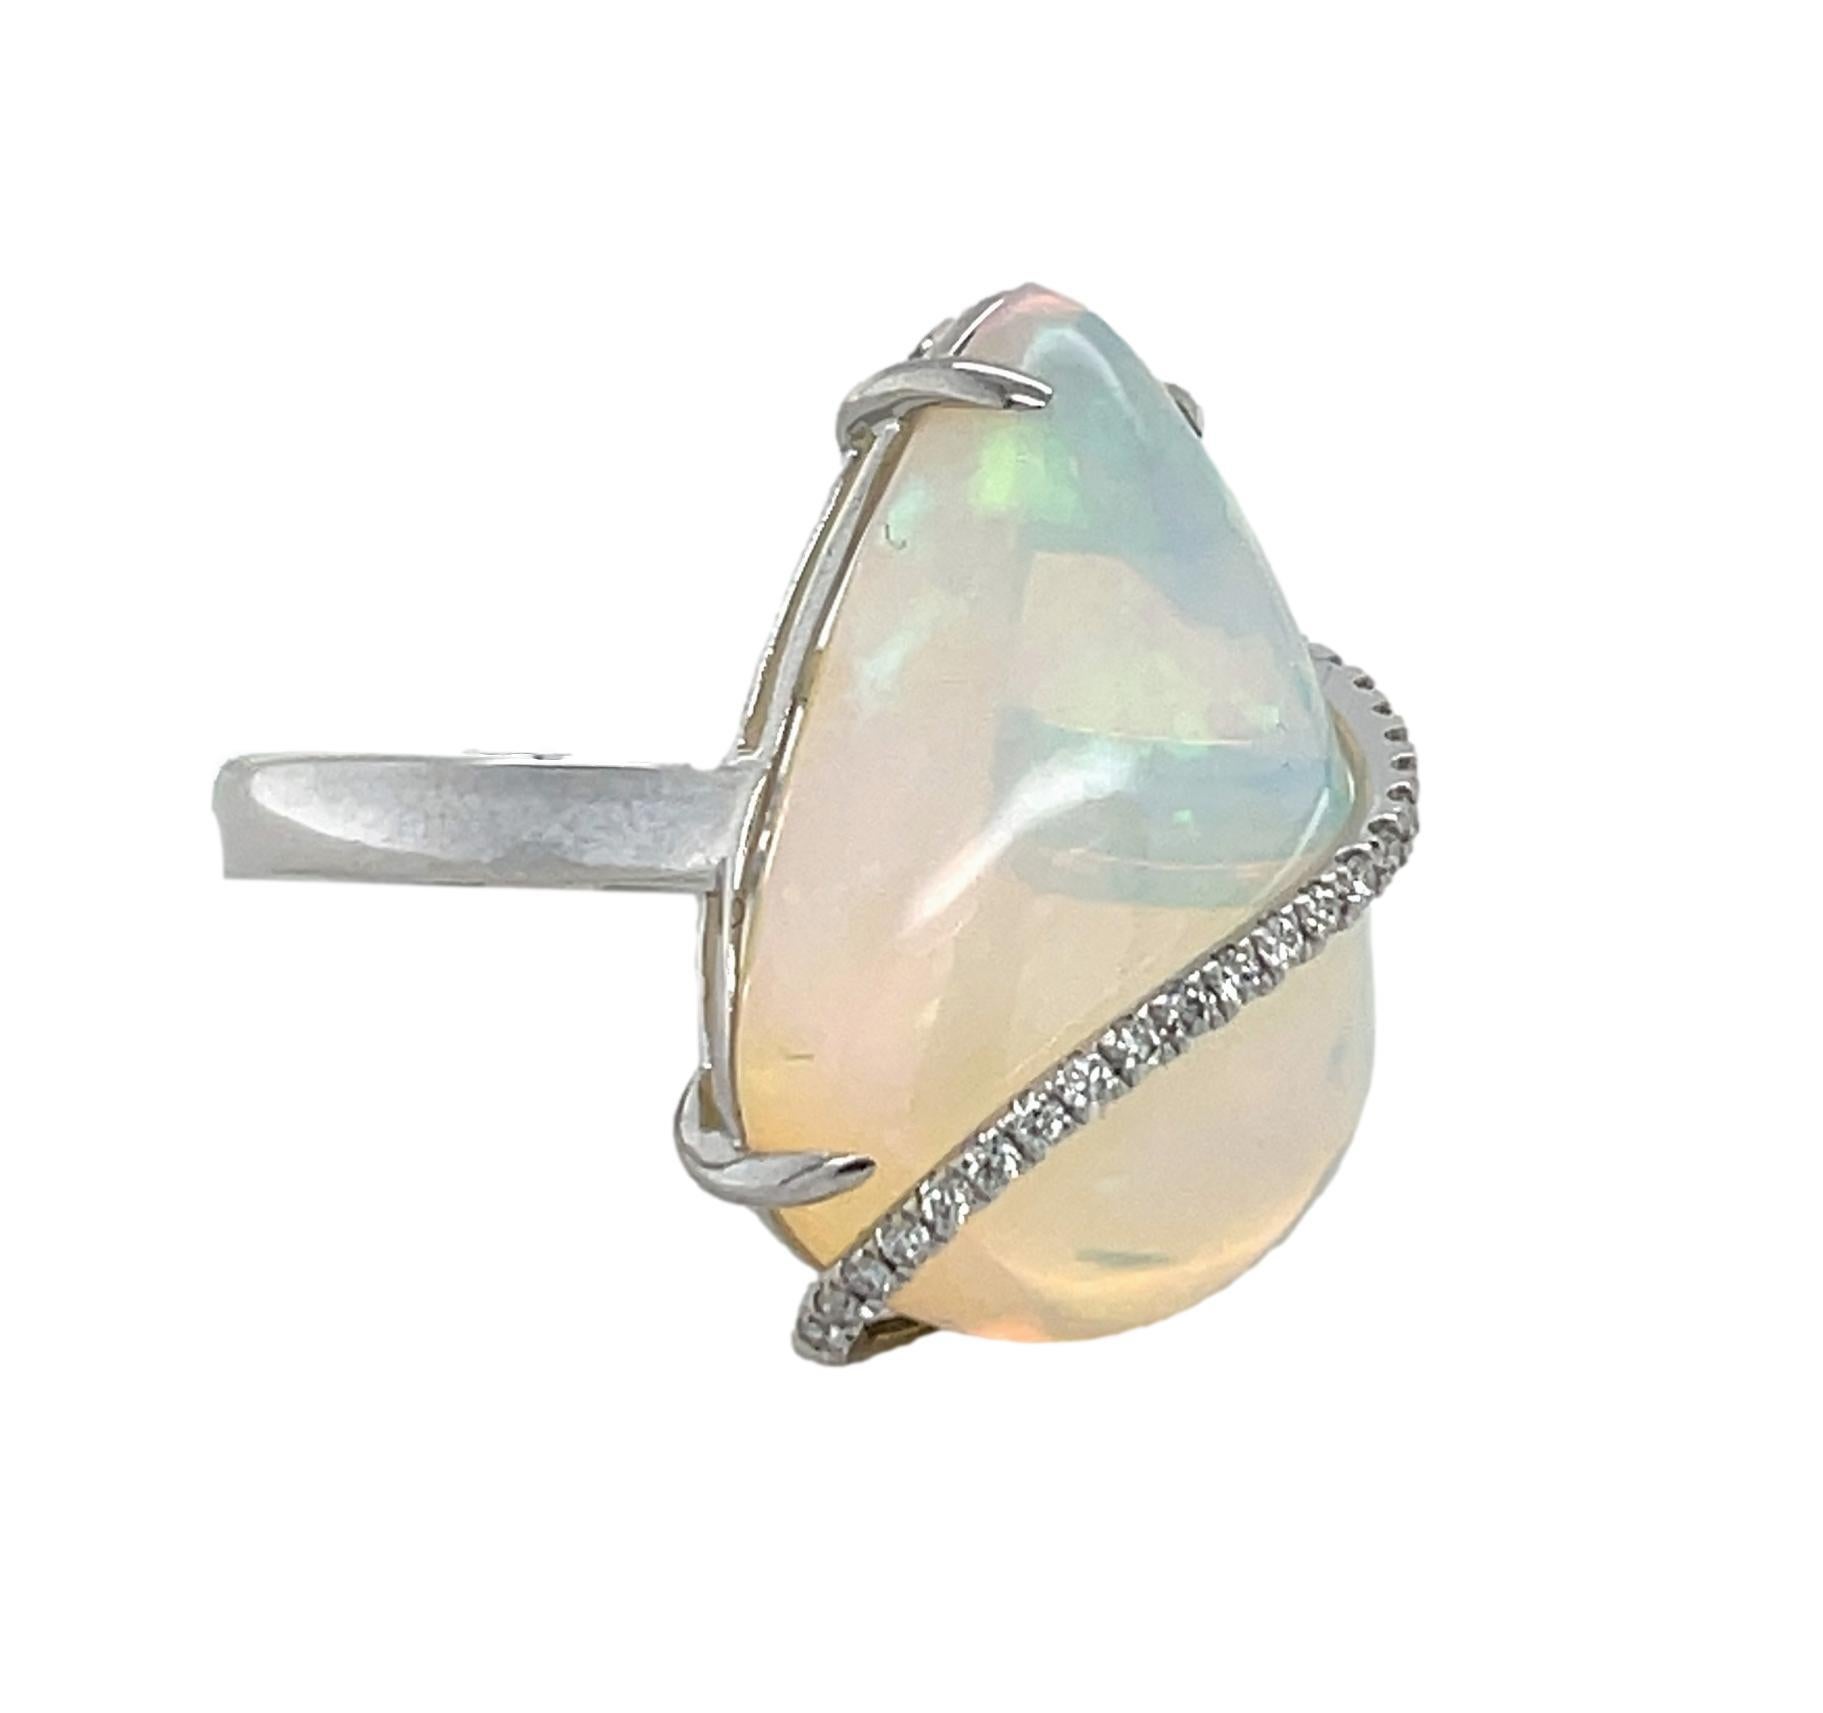 This stunning Statement ring has a 12.91 ct pear shape Ethiopian Opal with a swirl of 21 brilliant cut round diamonds elegantly crossing the stone. The Opal is 4 prong set in 14K white gold. This beautiful ring will be the talk of your special